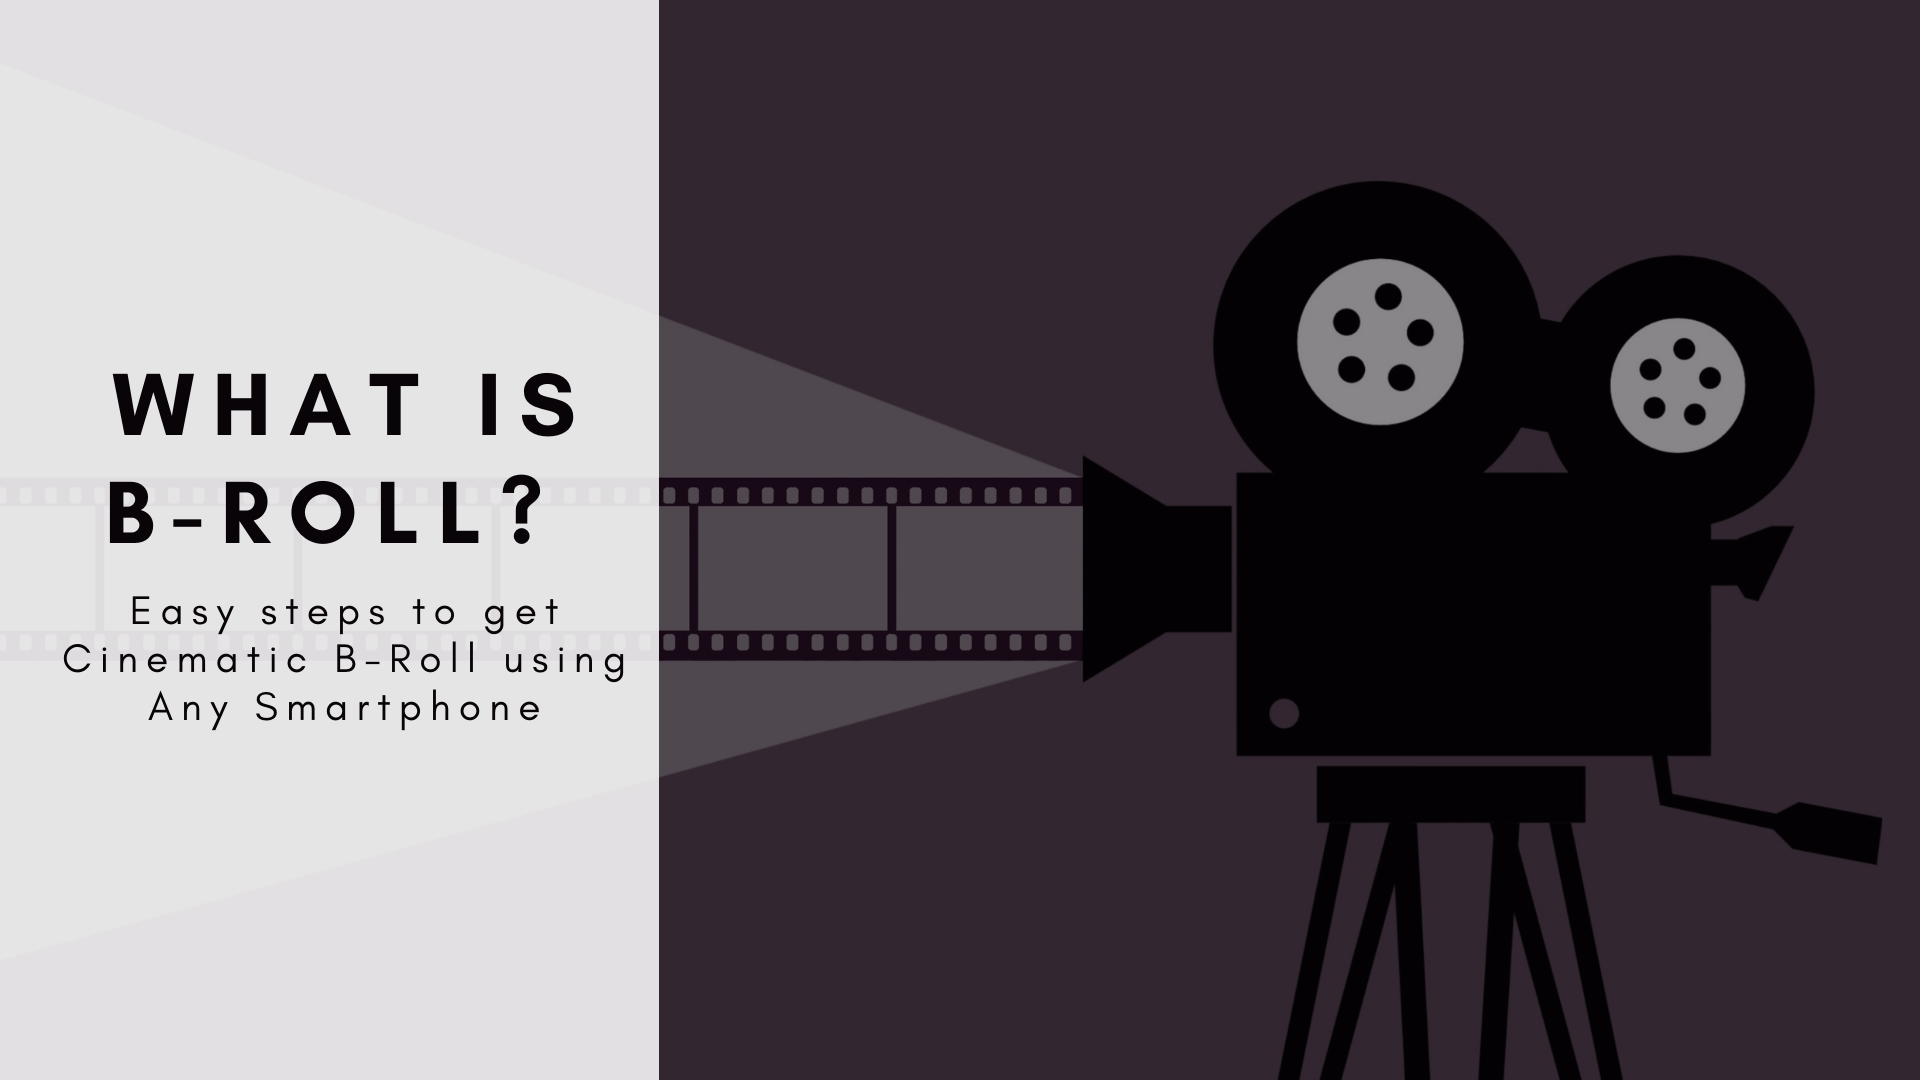 What is B-roll? shoot b-roll with smartphone